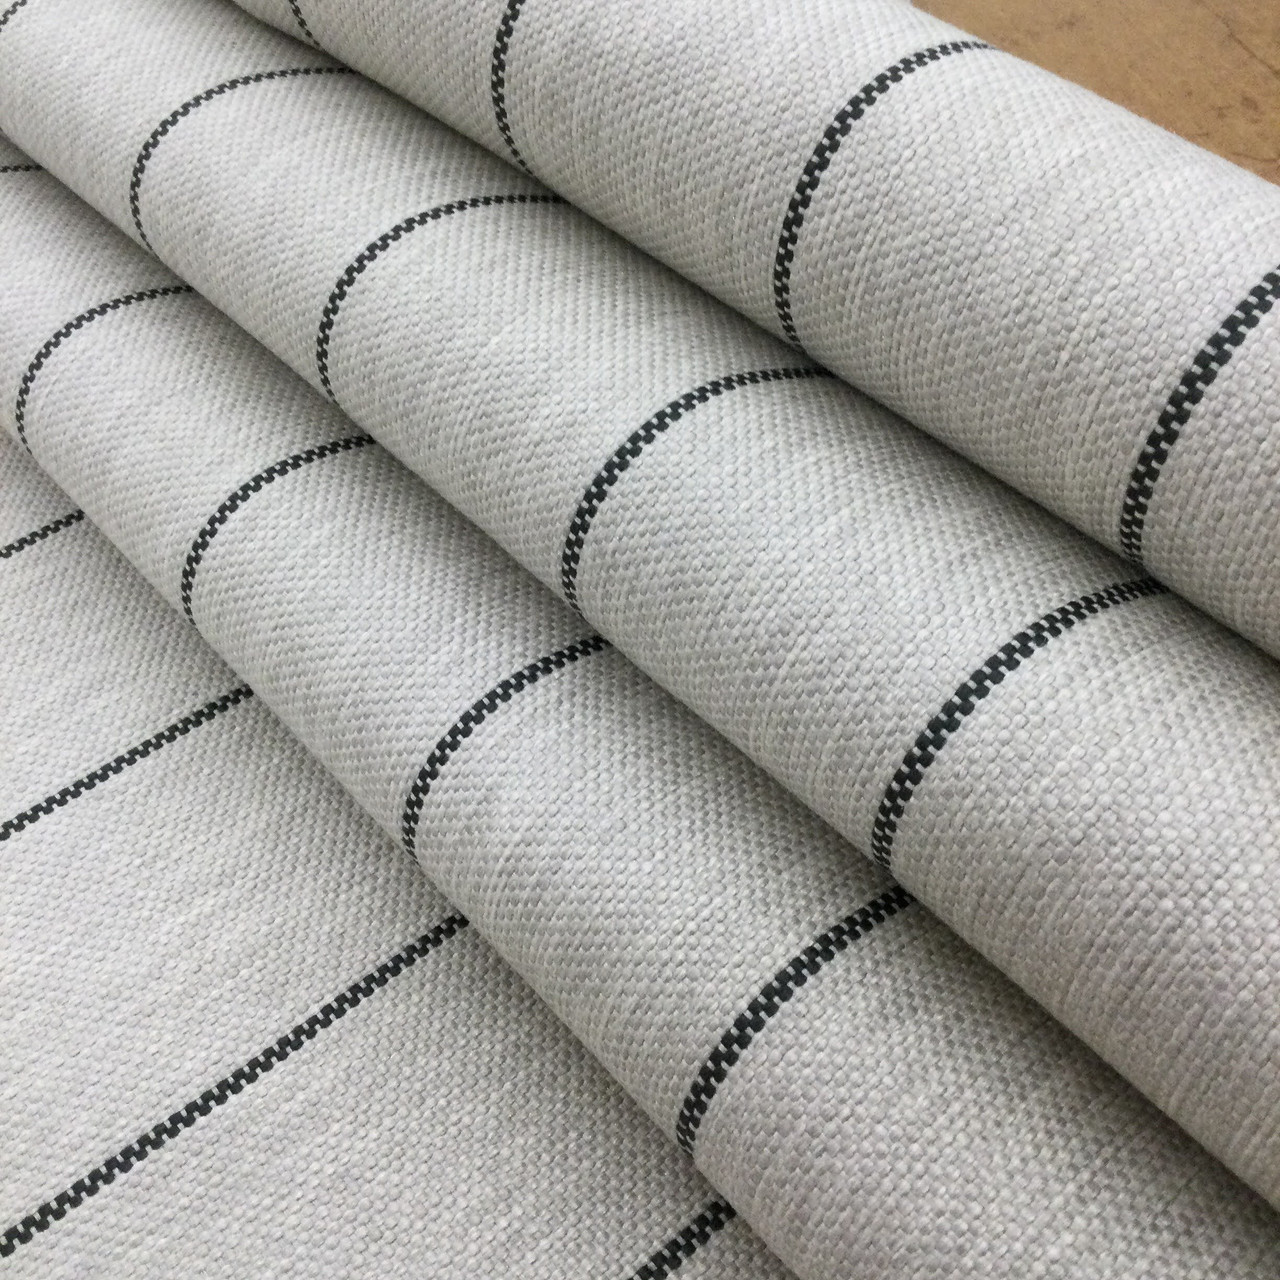 https://cdn11.bigcommerce.com/s-z9t2ne/images/stencil/1280x1280/products/47726/431863/thin-striped-fabric-in-silver-grey-and-charcoal__54414.1666296558.jpg?c=2